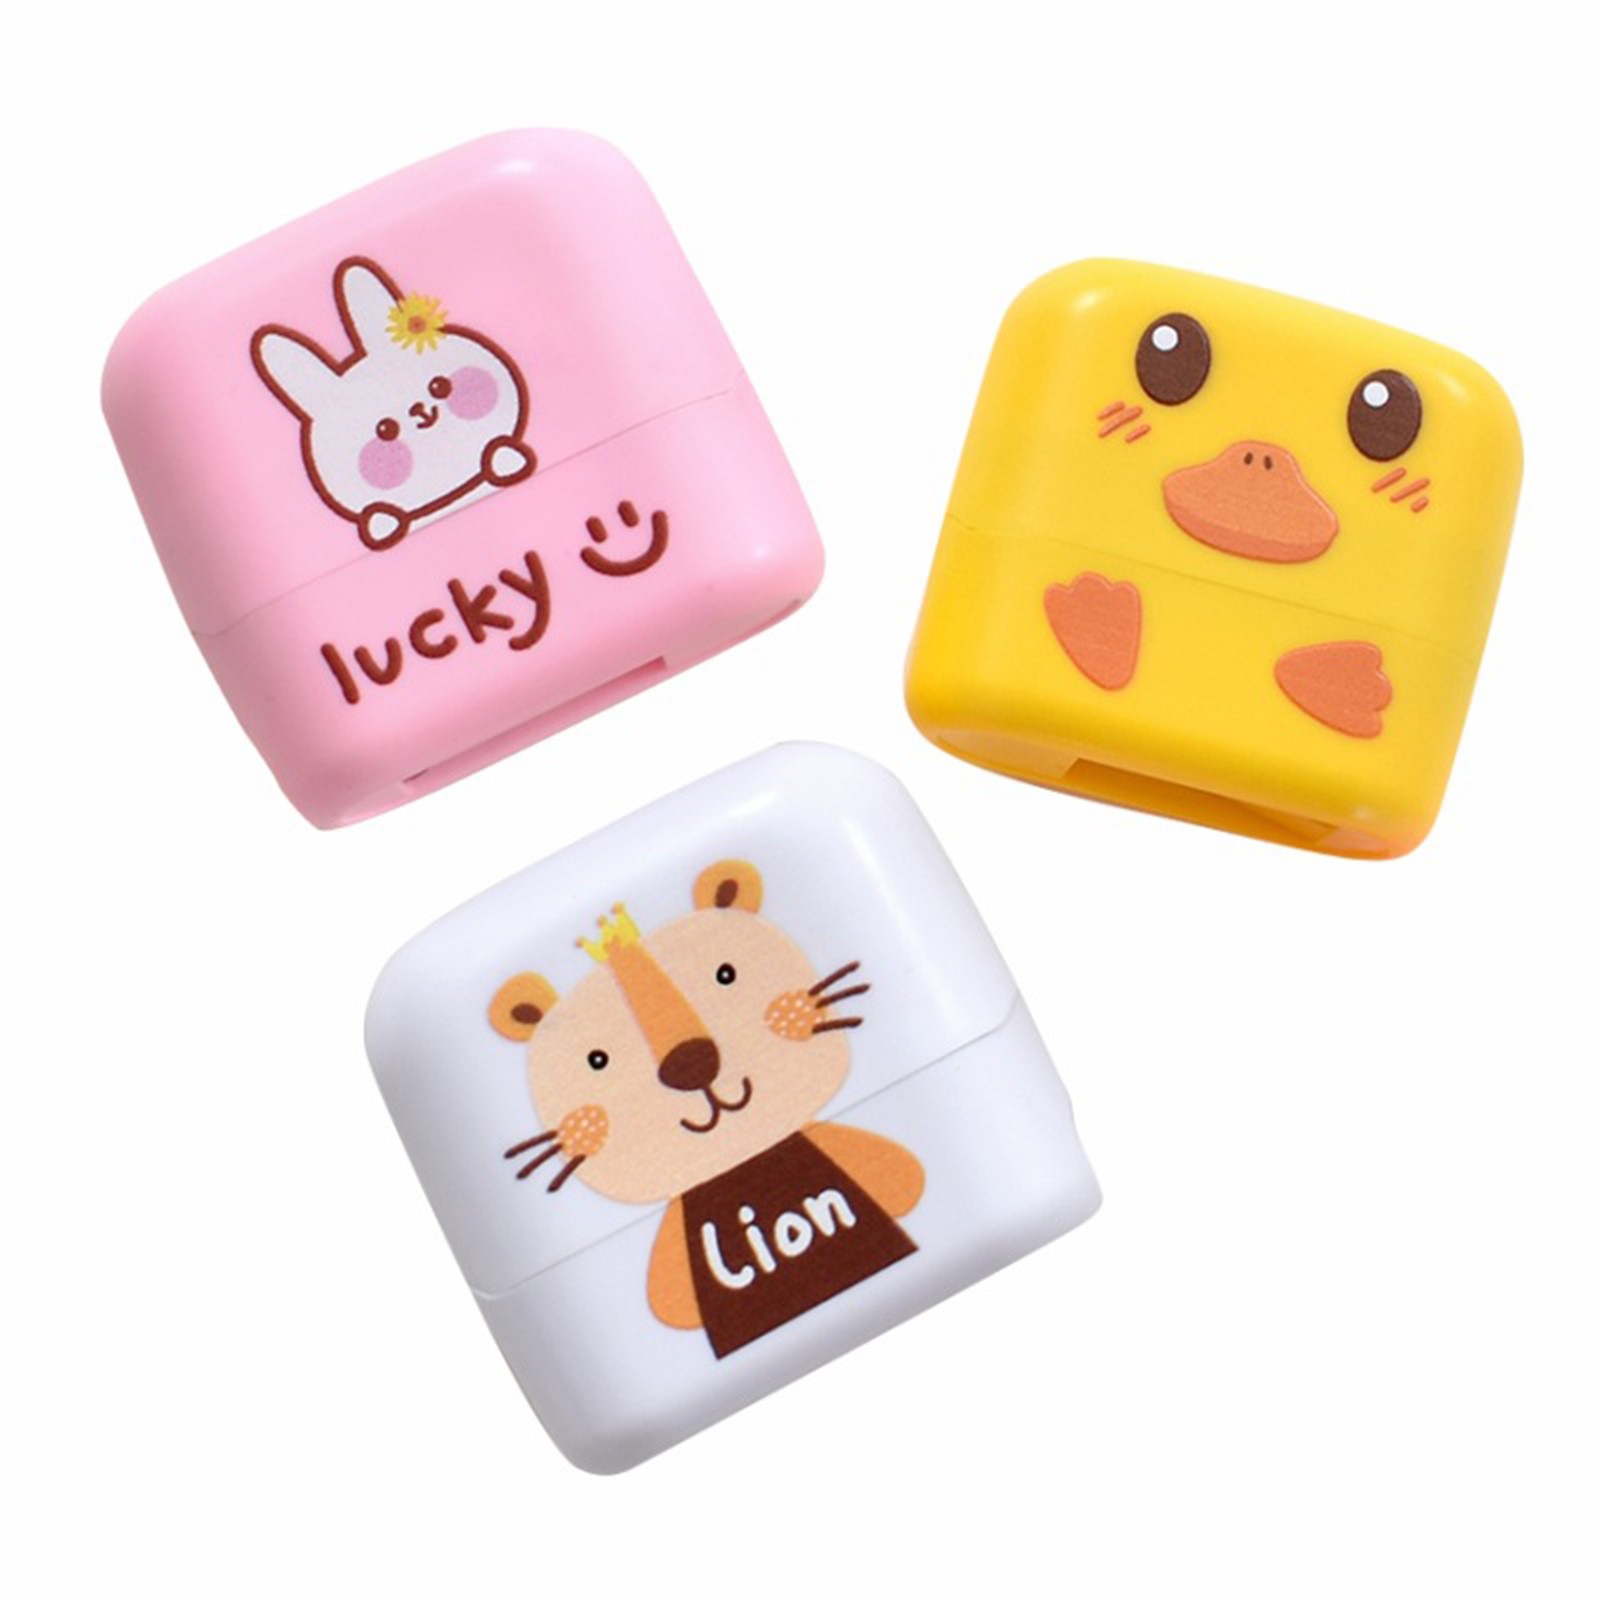 Baocc Name Stamp for Clothing Name Stamp for Clothing Name Stamp Personalized Stamp for Kids Cloths Fabric Stamper for Clothes Pencil Sharpener,Office